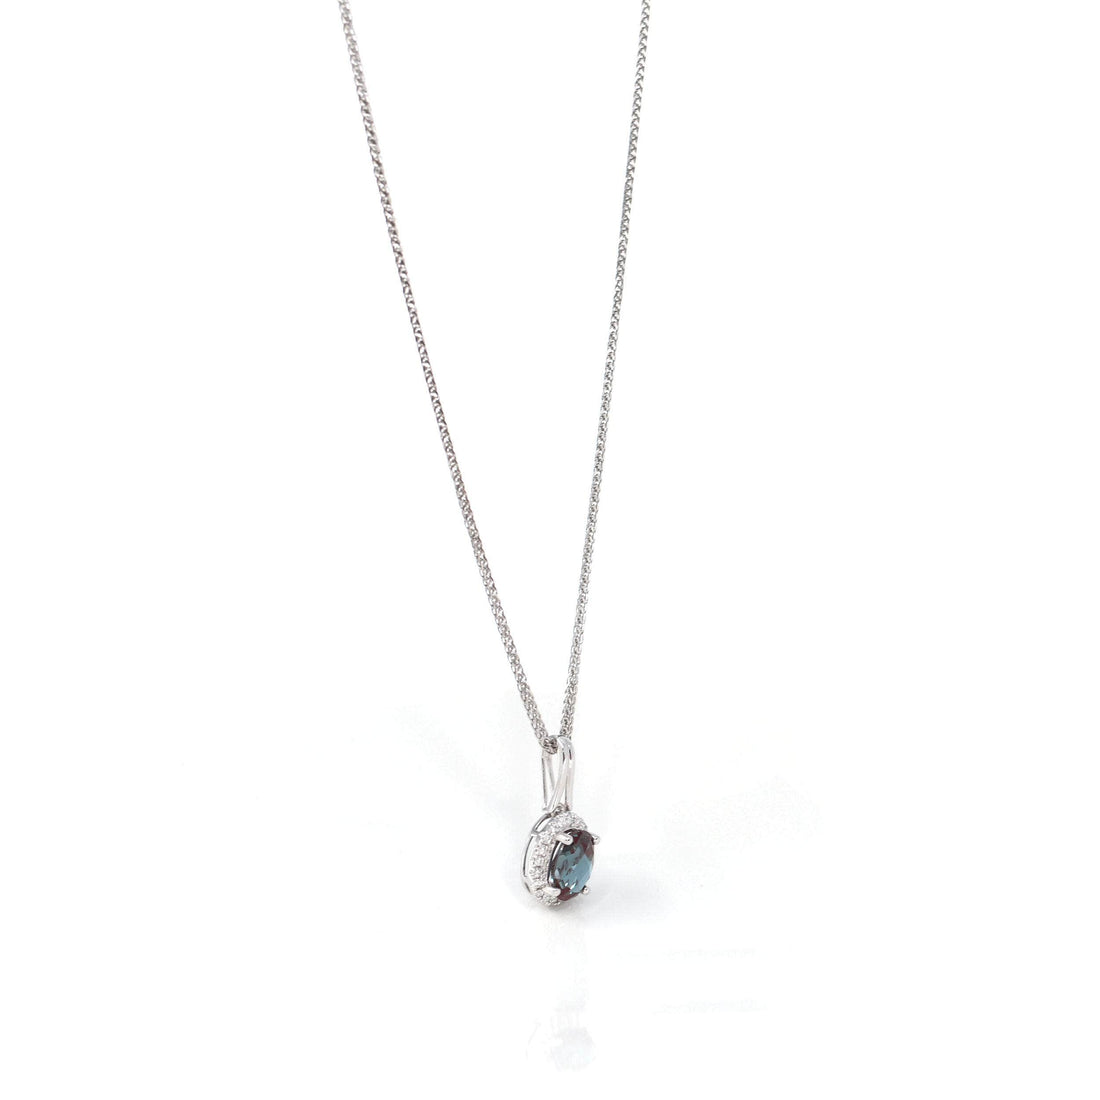 Baikalla Jewelry Gemstone Pendant Necklace 14k White Gold Lab Created Alexandrite Faceted Oval Prong Set Necklace With Diamonds